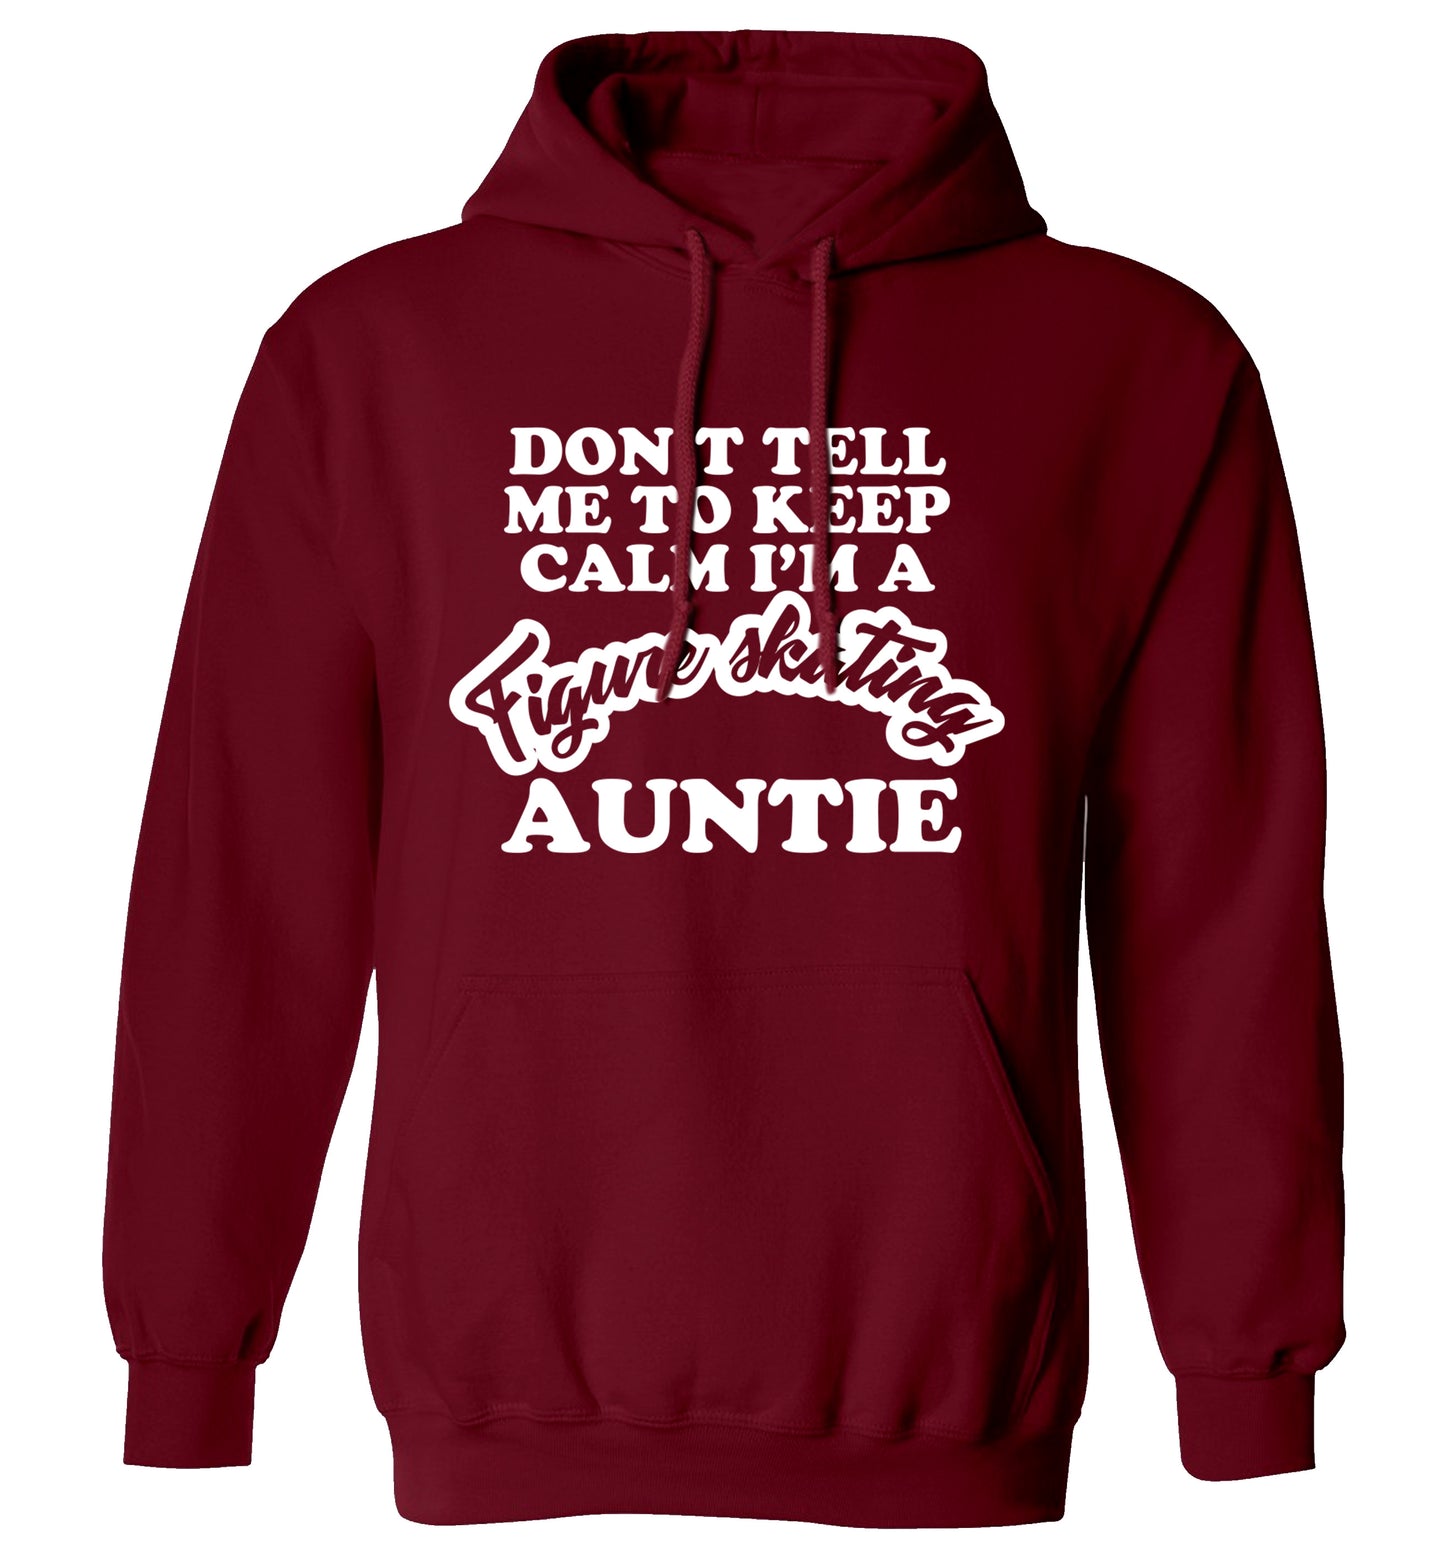 Don't tell me to keep calm I'm a figure skating auntie adults unisexmaroon hoodie 2XL